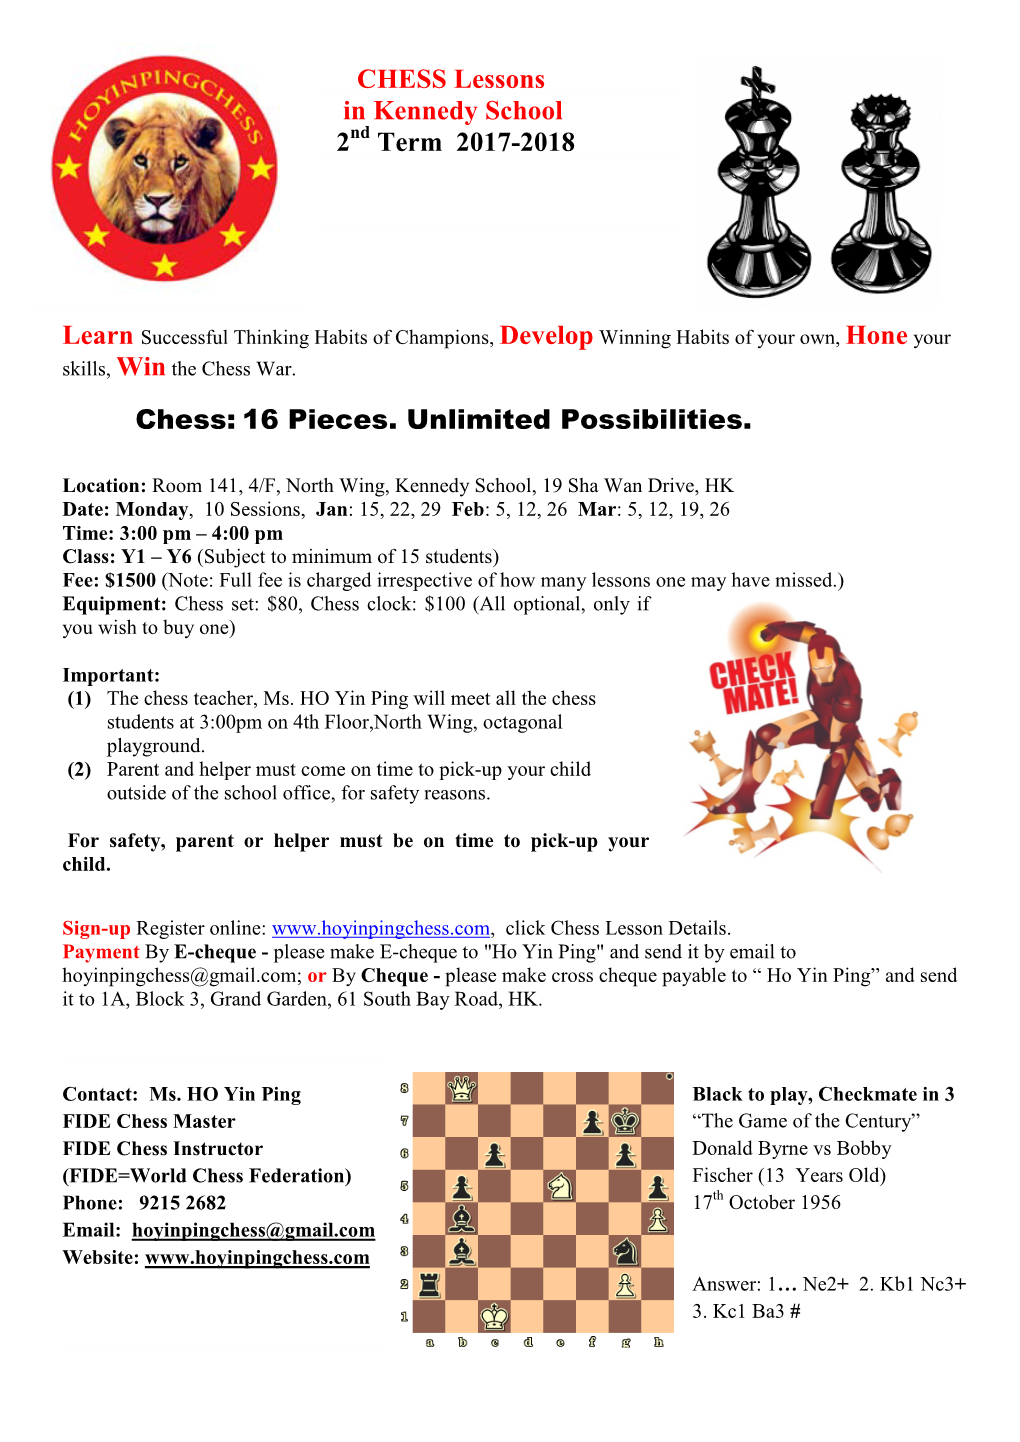 CHESS Lessons in Kennedy School 2 Term 2017-2018 Chess: 16 Pieces